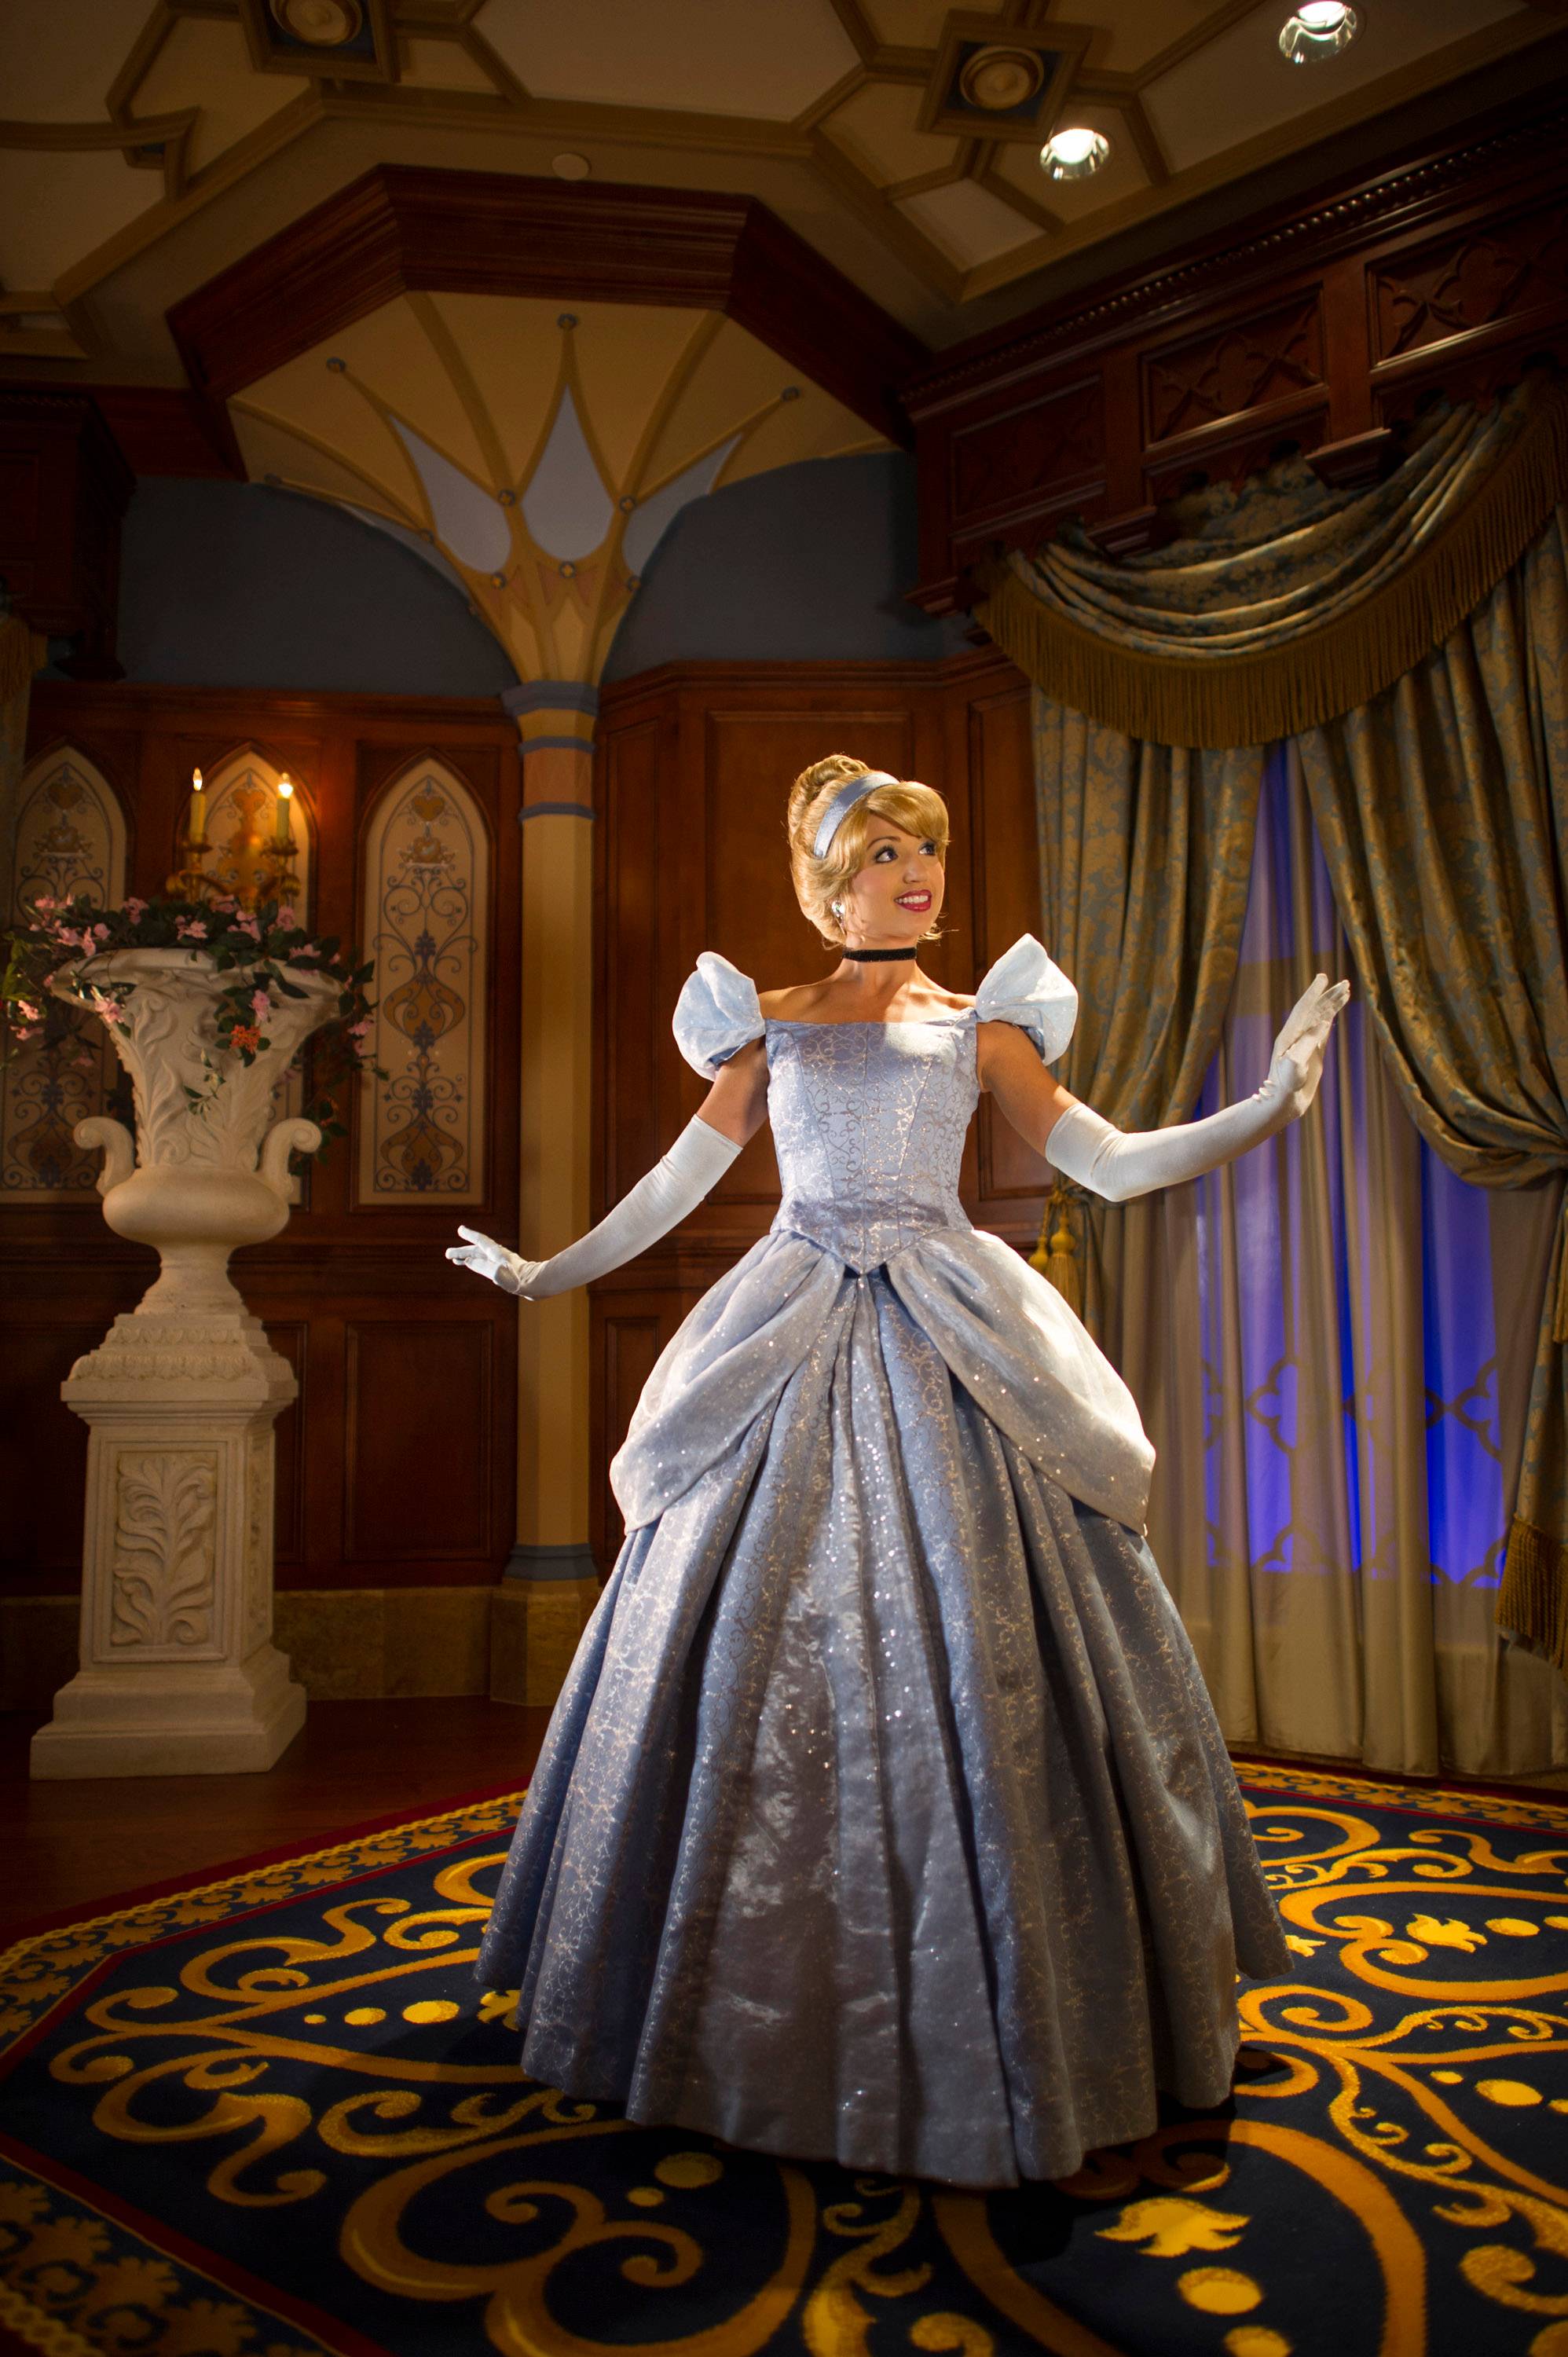 Frozen characters Elsa and Anna arrive at Princess Fairytale Hall and already waits are over 2 and a half hours